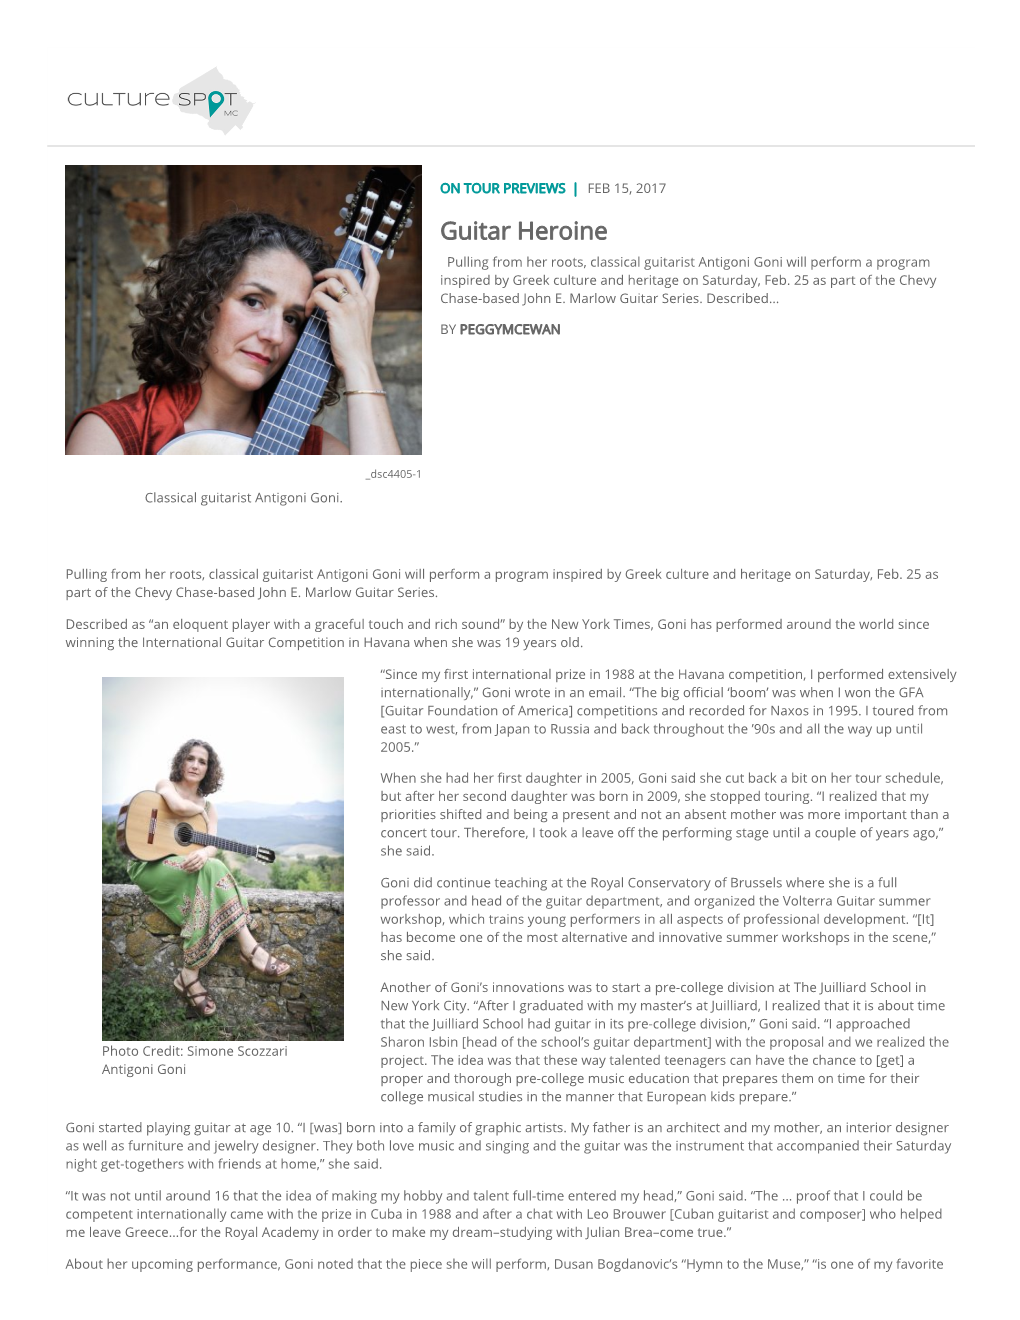 Guitar Heroine Pulling from Her Roots, Classical Guitarist Antigoni Goni Will Perform a Program Inspired by Greek Culture and Heritage on Saturday, Feb